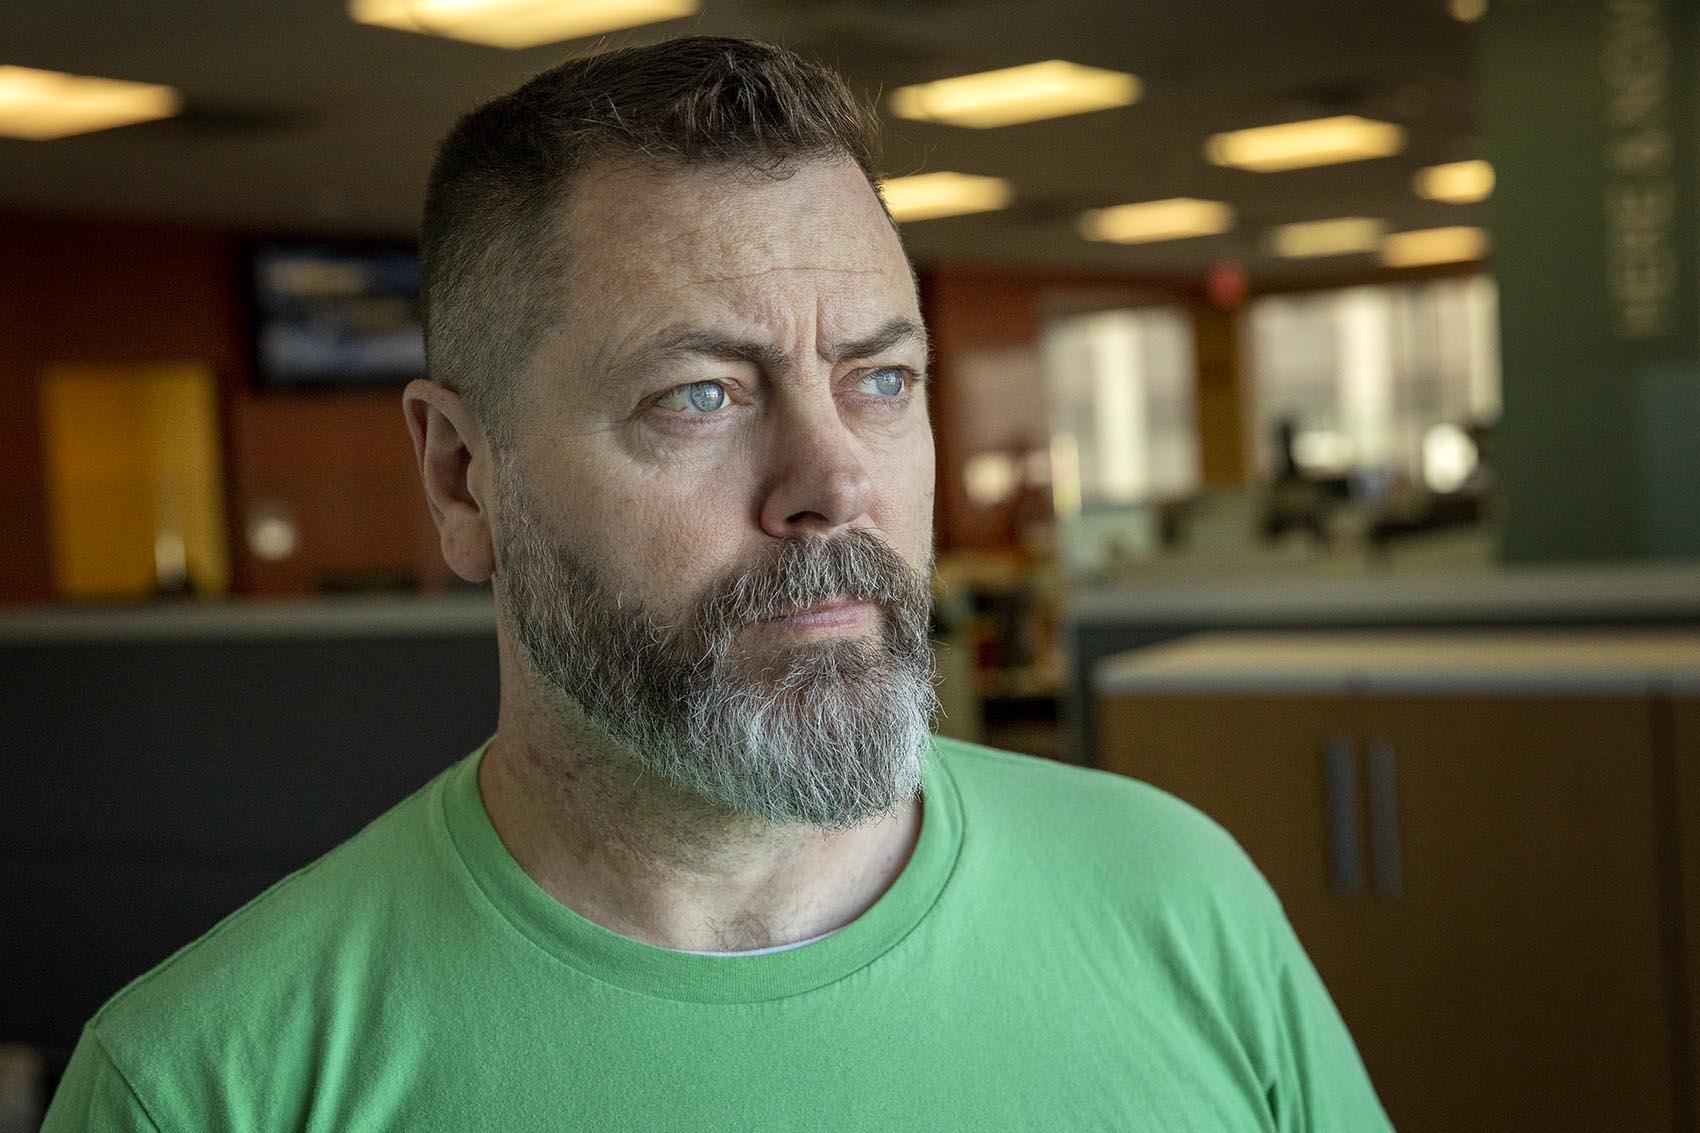 Nick Offerman Wiki, Bio, Age, Net Worth, and Other Facts